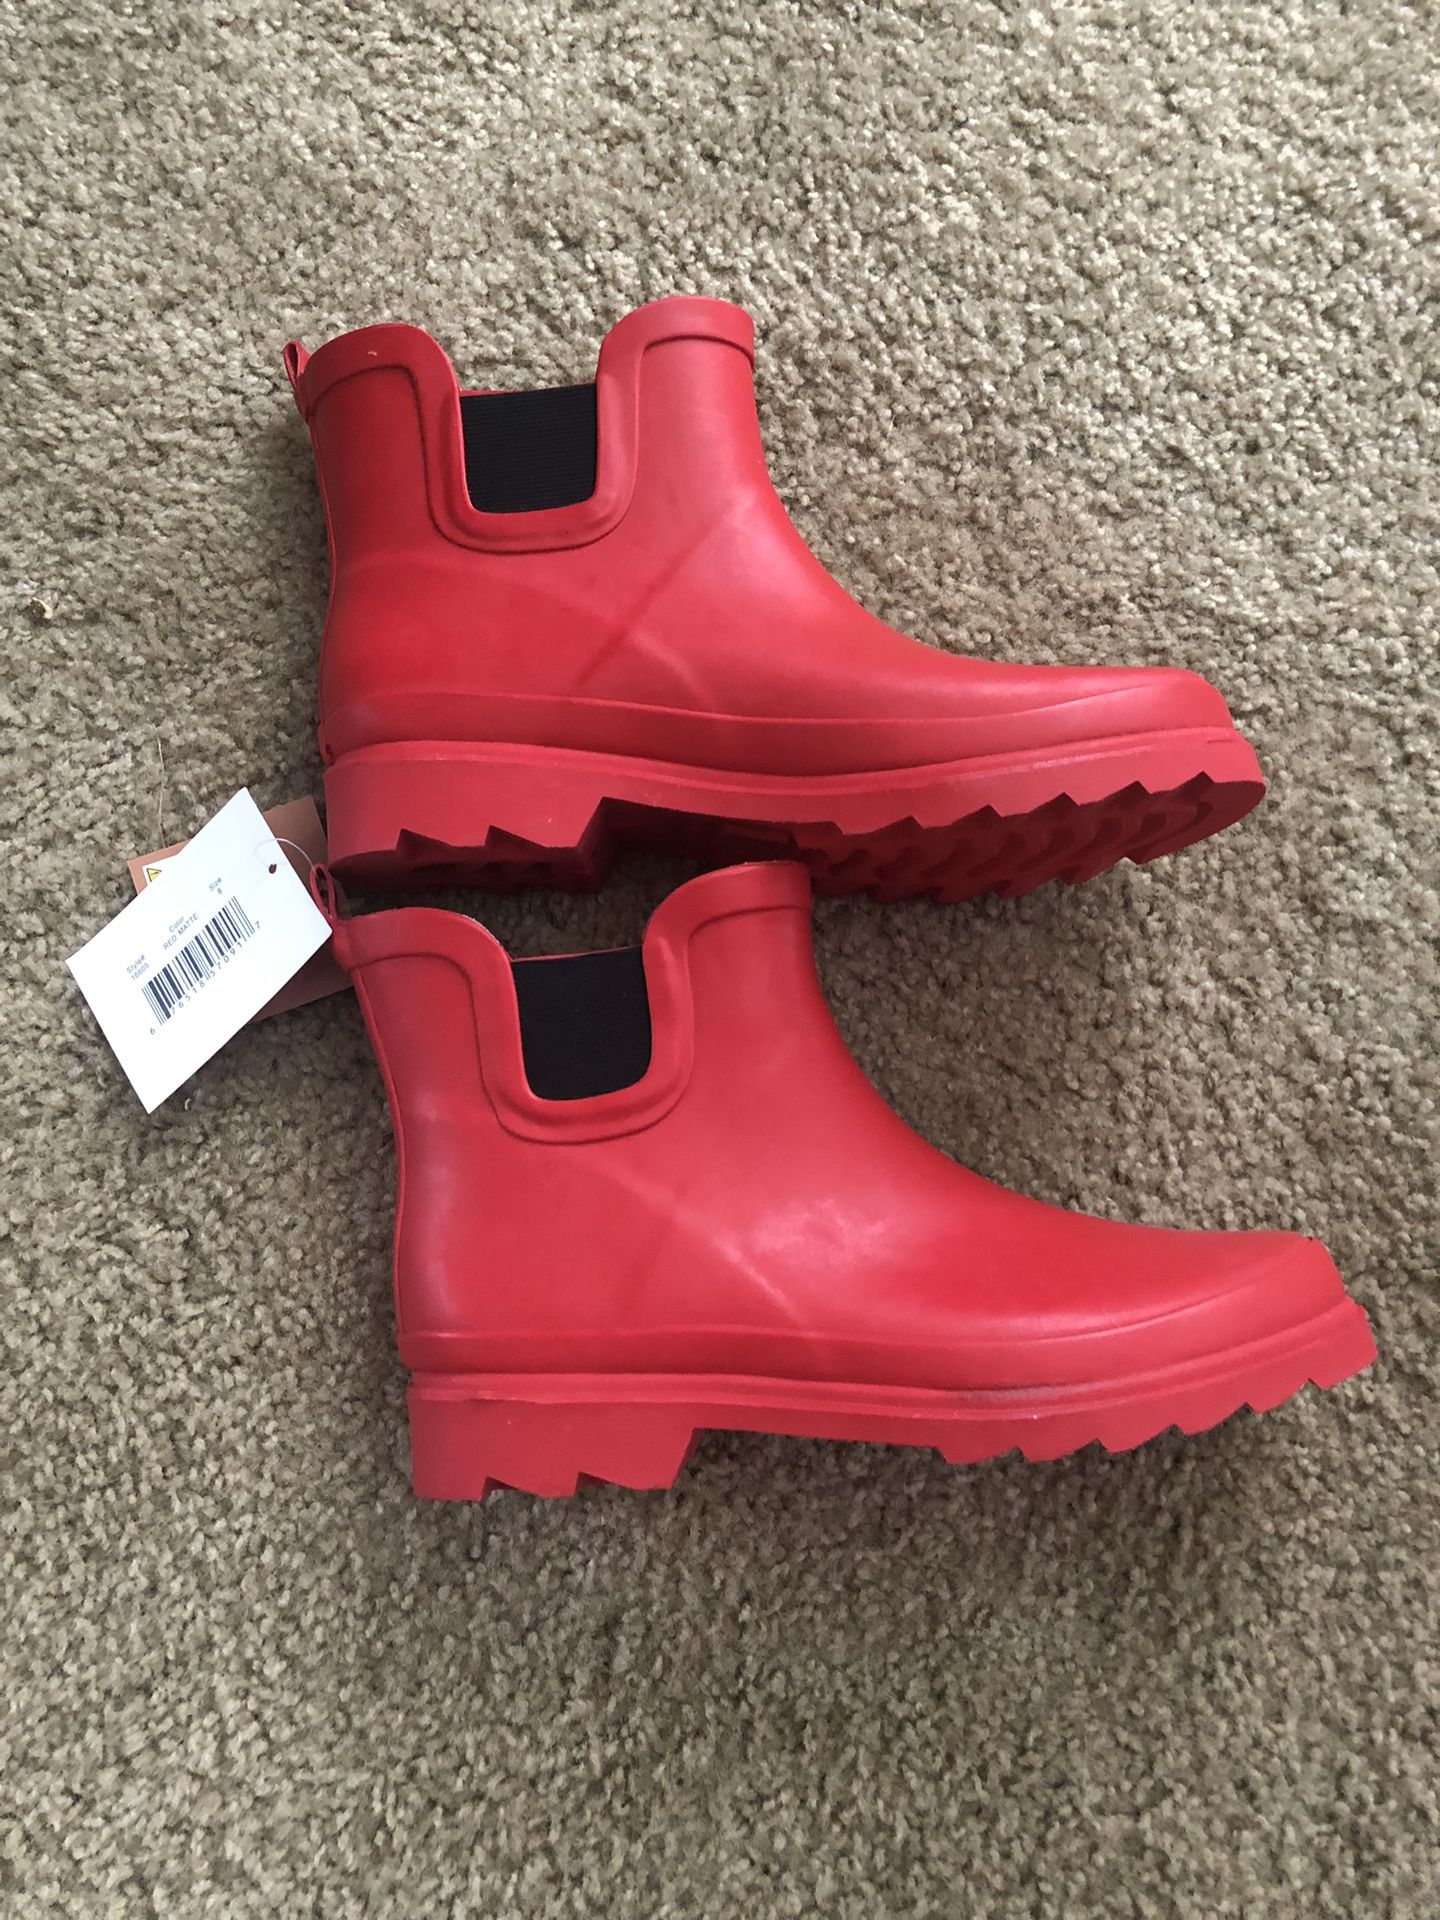 Brand New Red Norty Women’s Rubber Rain Boots Size 8